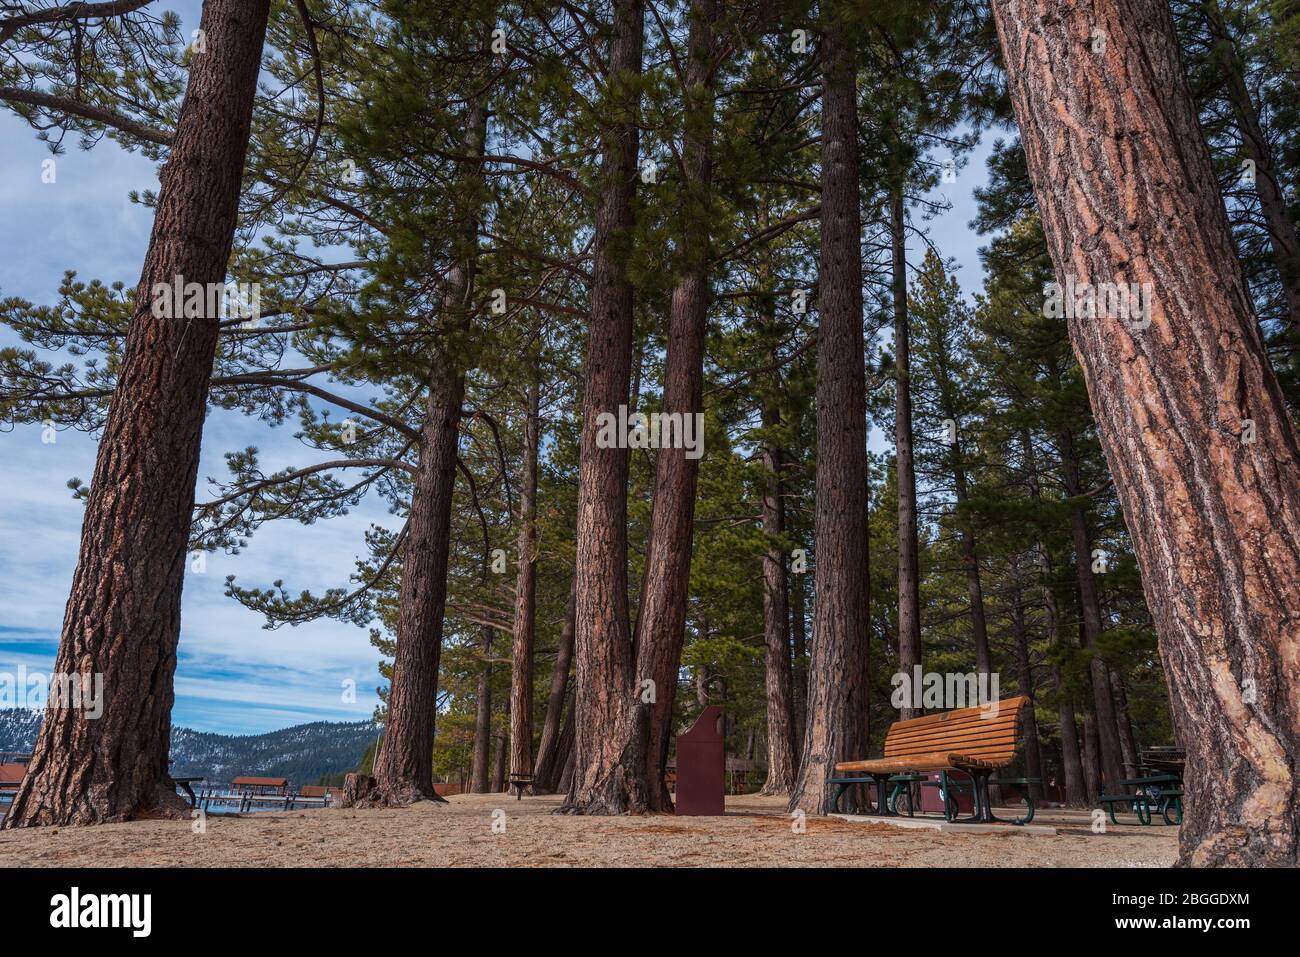 Landscape of tall trees and empty beach in Incline Village, Nevada Stock Photo